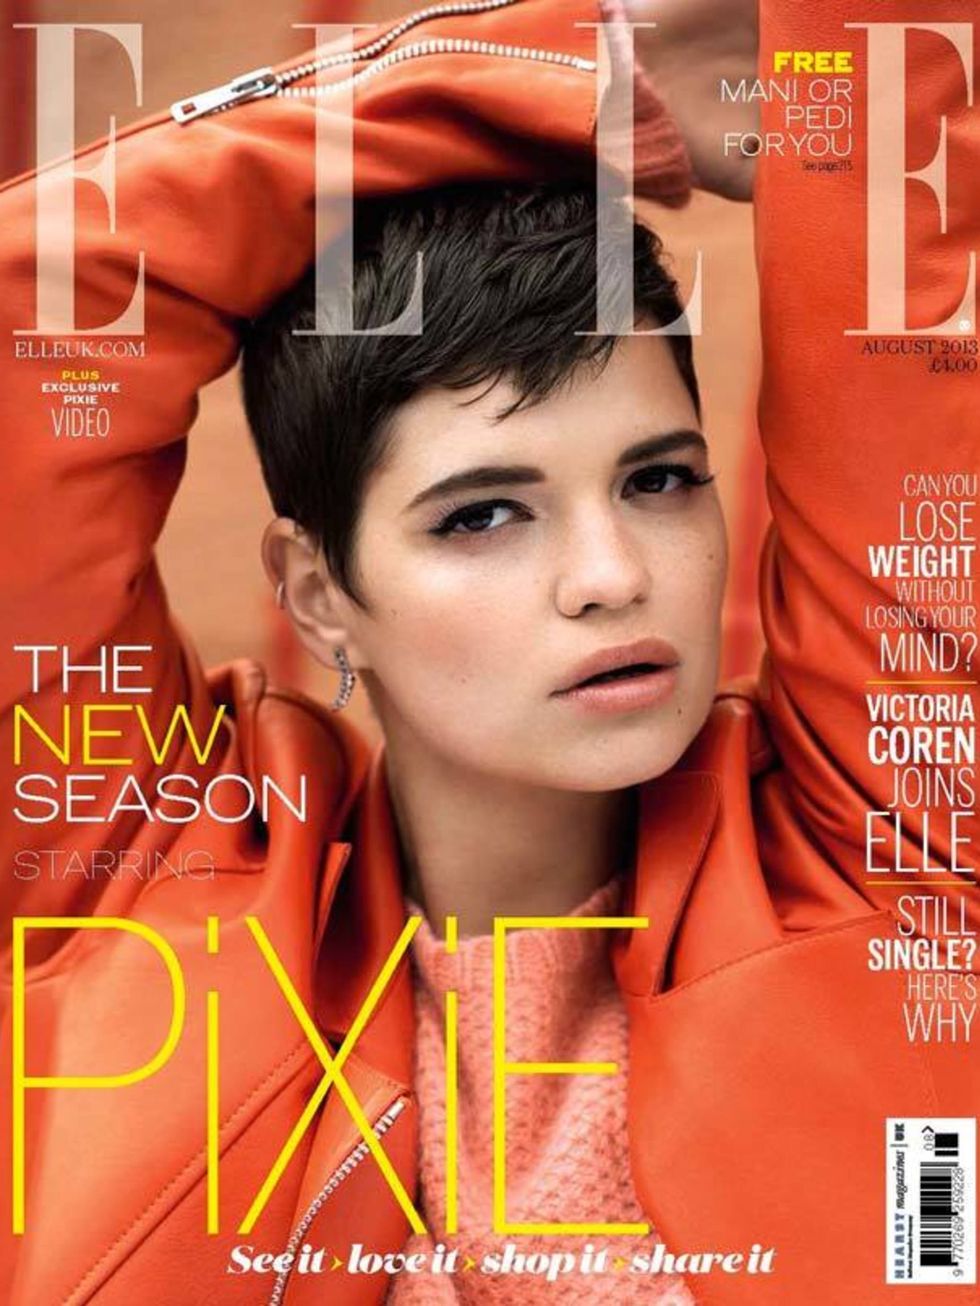 <p>Cute, al-fresco make up for Pixie Geldof on our location cover shoot for the August 2013 issue.</p>

<p>Florrie says:</p>

<p>'For a fuller pout, dab clear gloss in the center of your lips and gently rub outwards.'</p>

<p><a href="http://www.clinique.